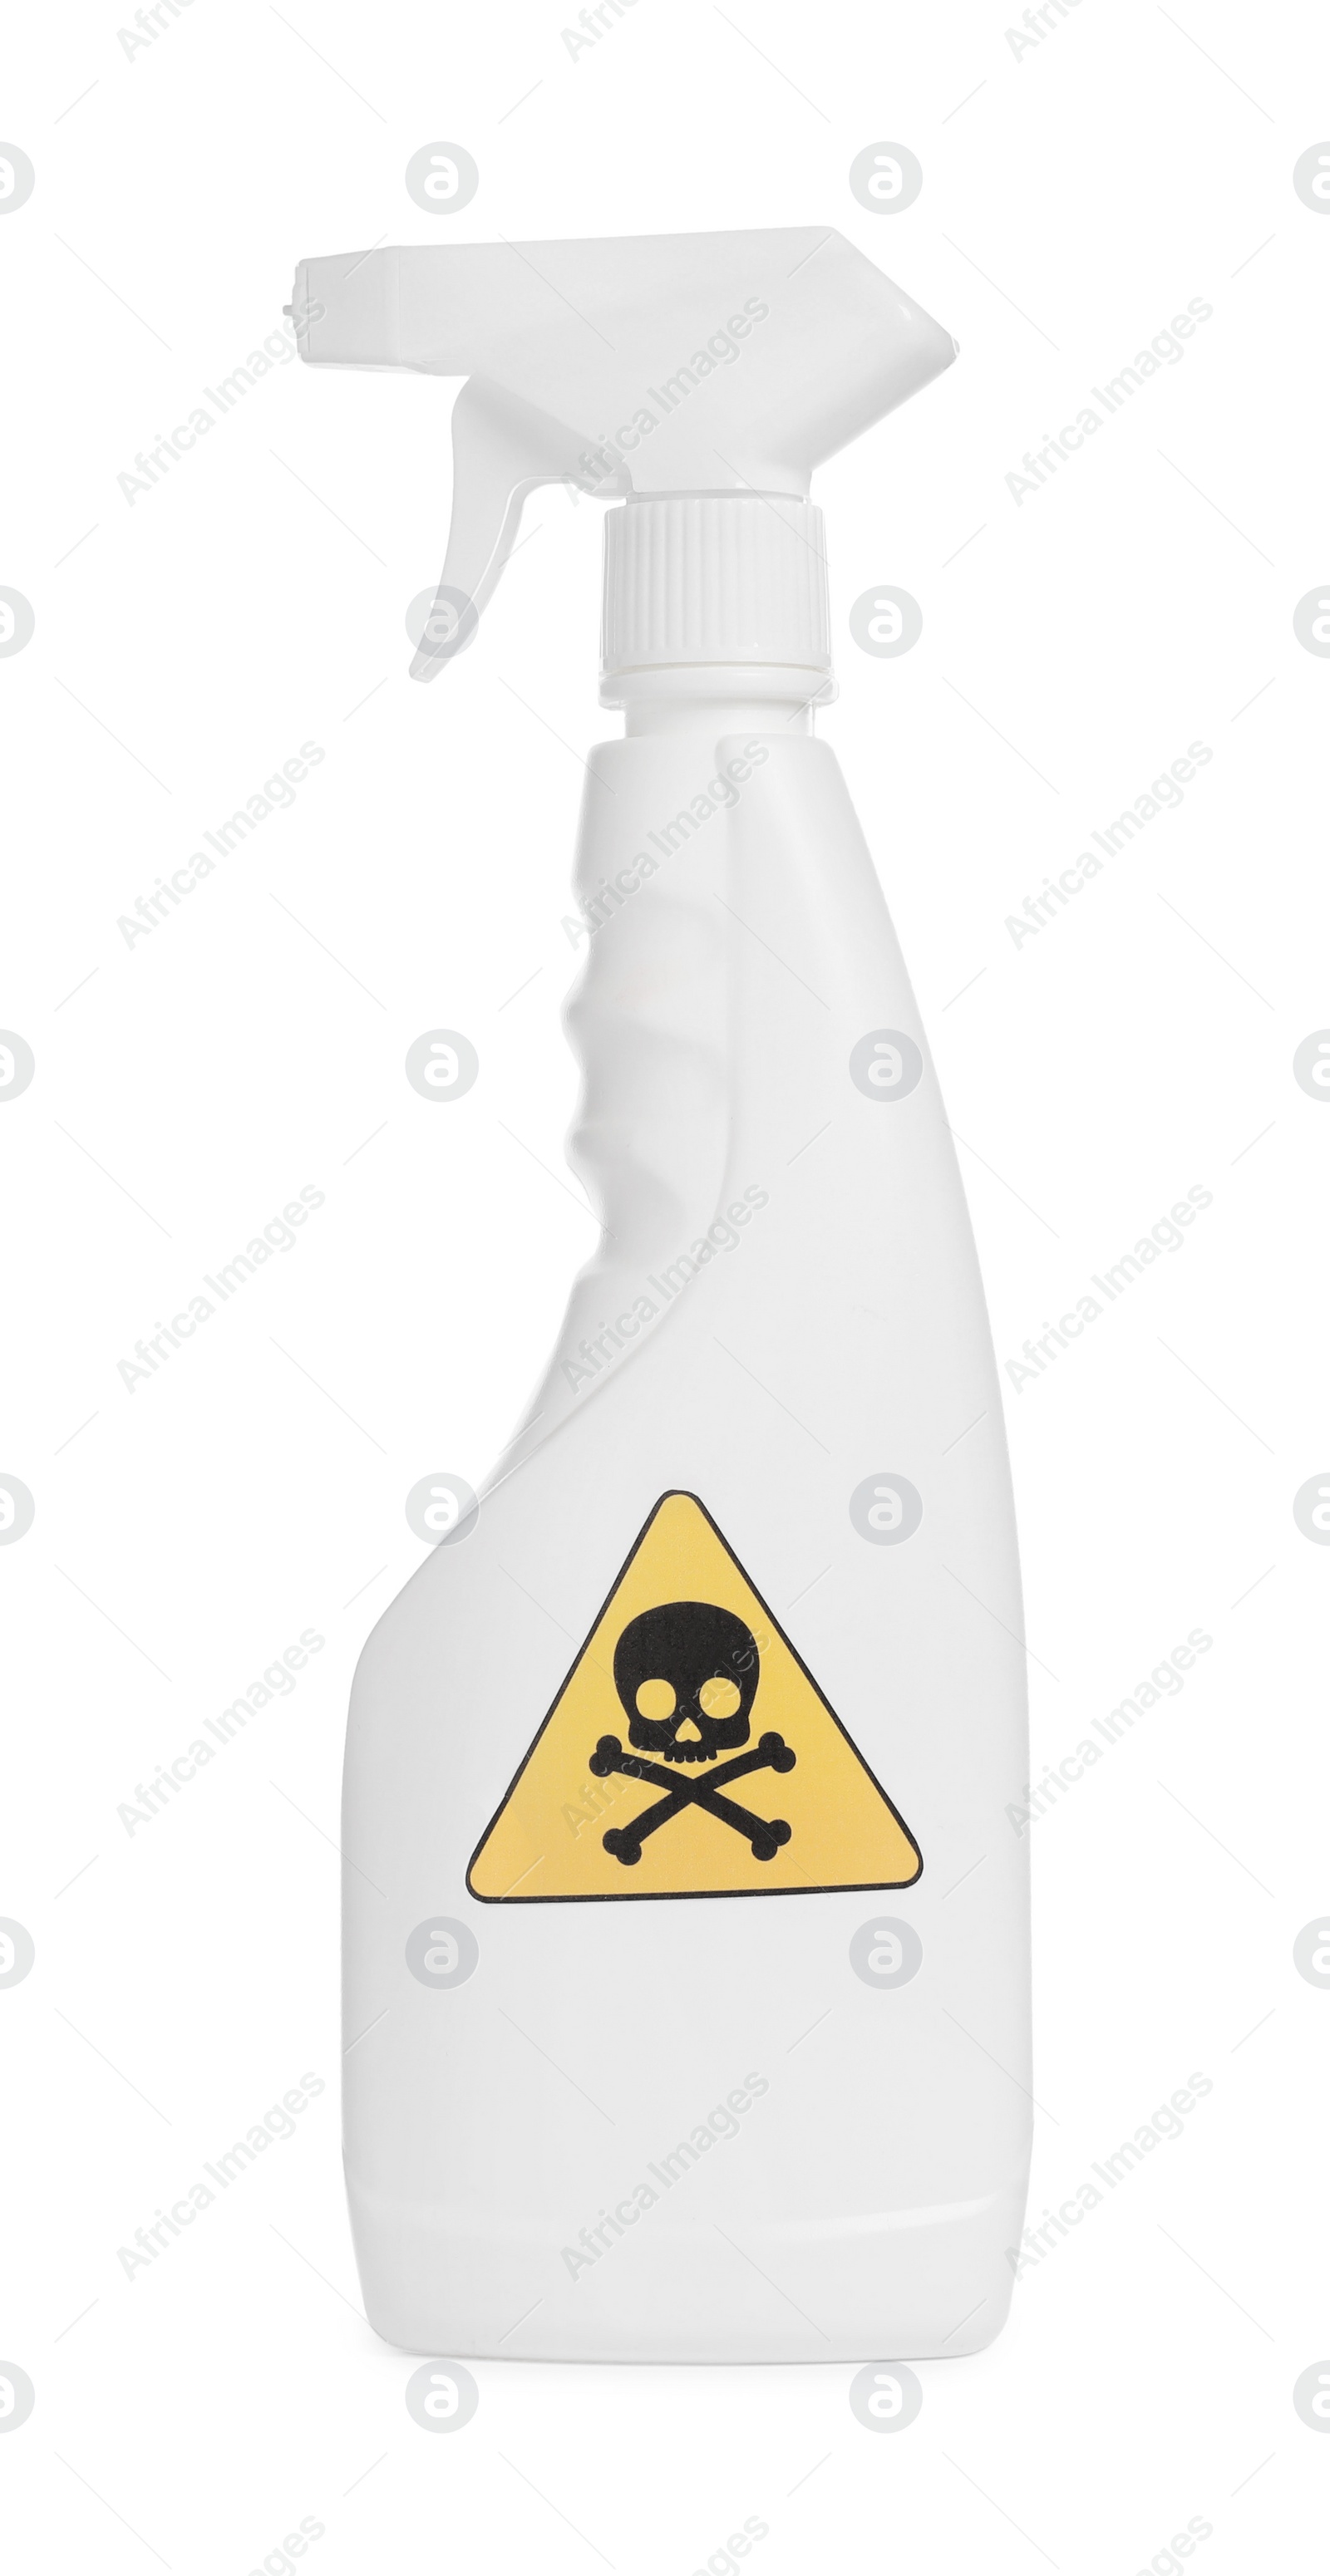 Photo of Bottle of toxic household chemical with warning sign isolated on white